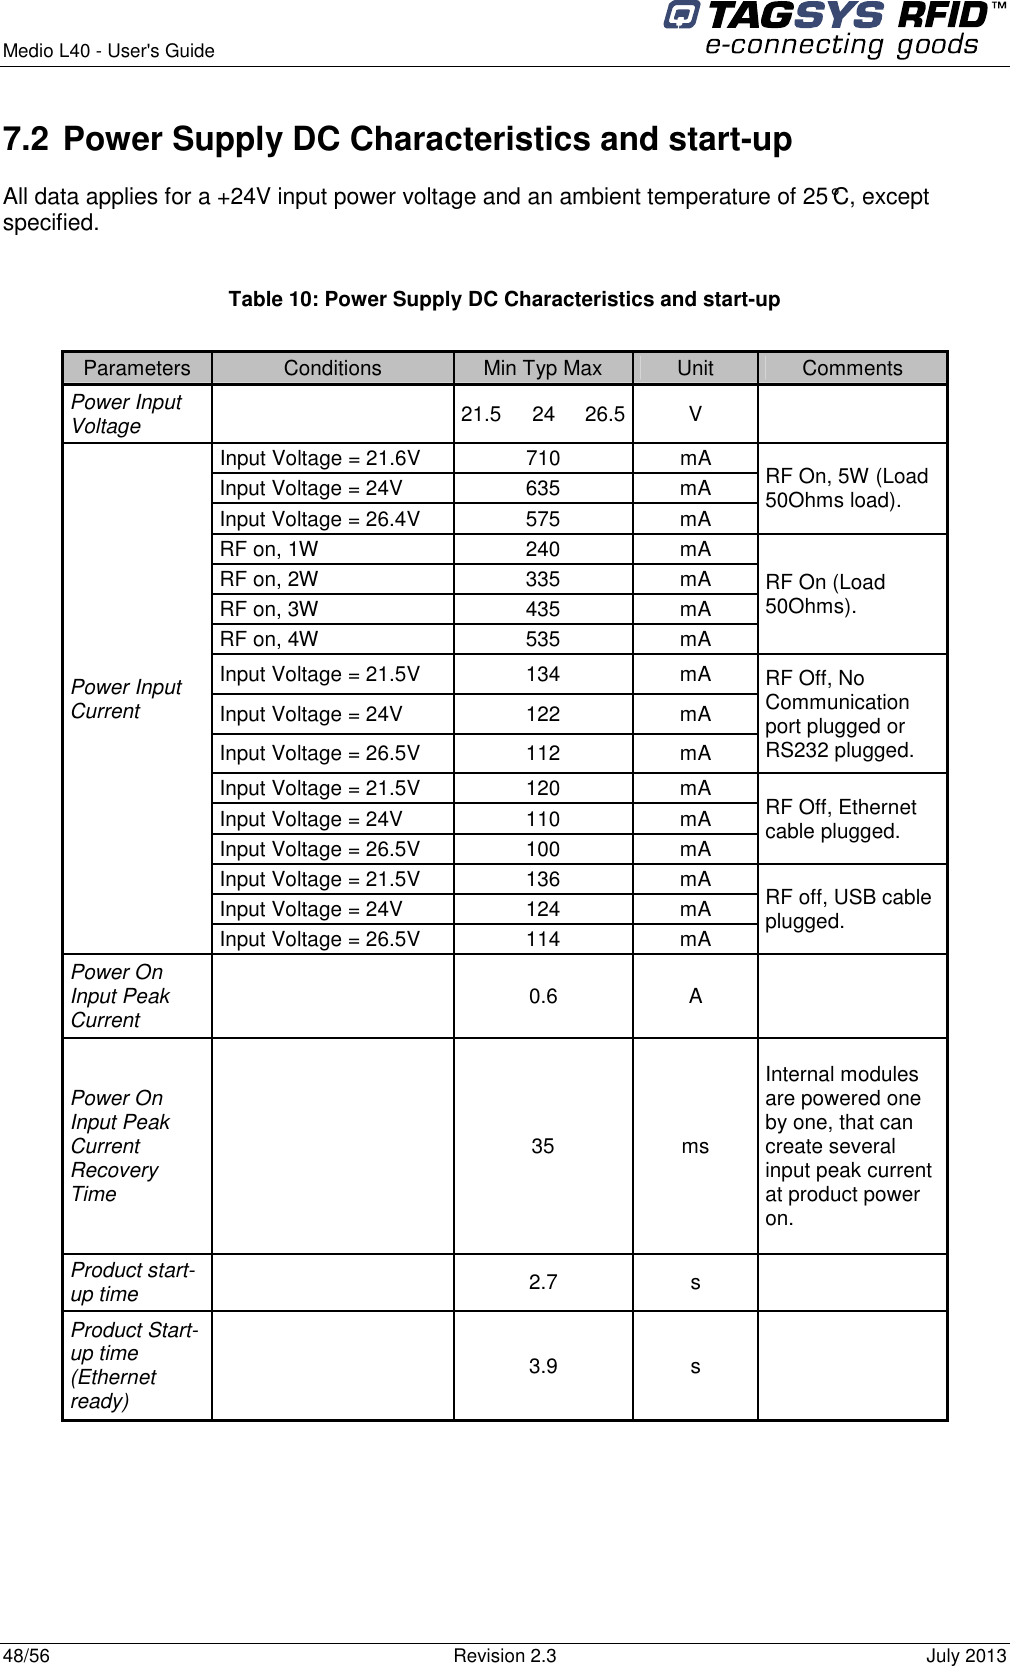  Medio L40 - User&apos;s Guide     48/56  Revision 2.3  July 2013  7.2 Power Supply DC Characteristics and start-up All data applies for a +24V input power voltage and an ambient temperature of 25°C, except specified.  Table 10: Power Supply DC Characteristics and start-up  Parameters  Conditions  Min Typ Max  Unit  Comments Power Input Voltage     21.5  24  26.5 V    Power Input Current  Input Voltage = 21.6V  710  mA  RF On, 5W (Load 50Ohms load). Input Voltage = 24V  635  mA Input Voltage = 26.4V  575  mA RF on, 1W  240  mA RF On (Load 50Ohms). RF on, 2W  335  mA RF on, 3W  435  mA RF on, 4W  535  mA Input Voltage = 21.5V  134  mA  RF Off, No Communication port plugged or RS232 plugged. Input Voltage = 24V  122  mA Input Voltage = 26.5V  112  mA Input Voltage = 21.5V  120  mA  RF Off, Ethernet cable plugged. Input Voltage = 24V  110  mA Input Voltage = 26.5V  100  mA Input Voltage = 21.5V  136  mA  RF off, USB cable plugged. Input Voltage = 24V  124  mA Input Voltage = 26.5V  114  mA Power On Input Peak Current     0.6  A    Power On Input Peak Current Recovery Time    35  ms Internal modules are powered one by one, that can create several input peak current at product power on. Product start-up time     2.7  s    Product Start-up time (Ethernet ready)    3.9  s     